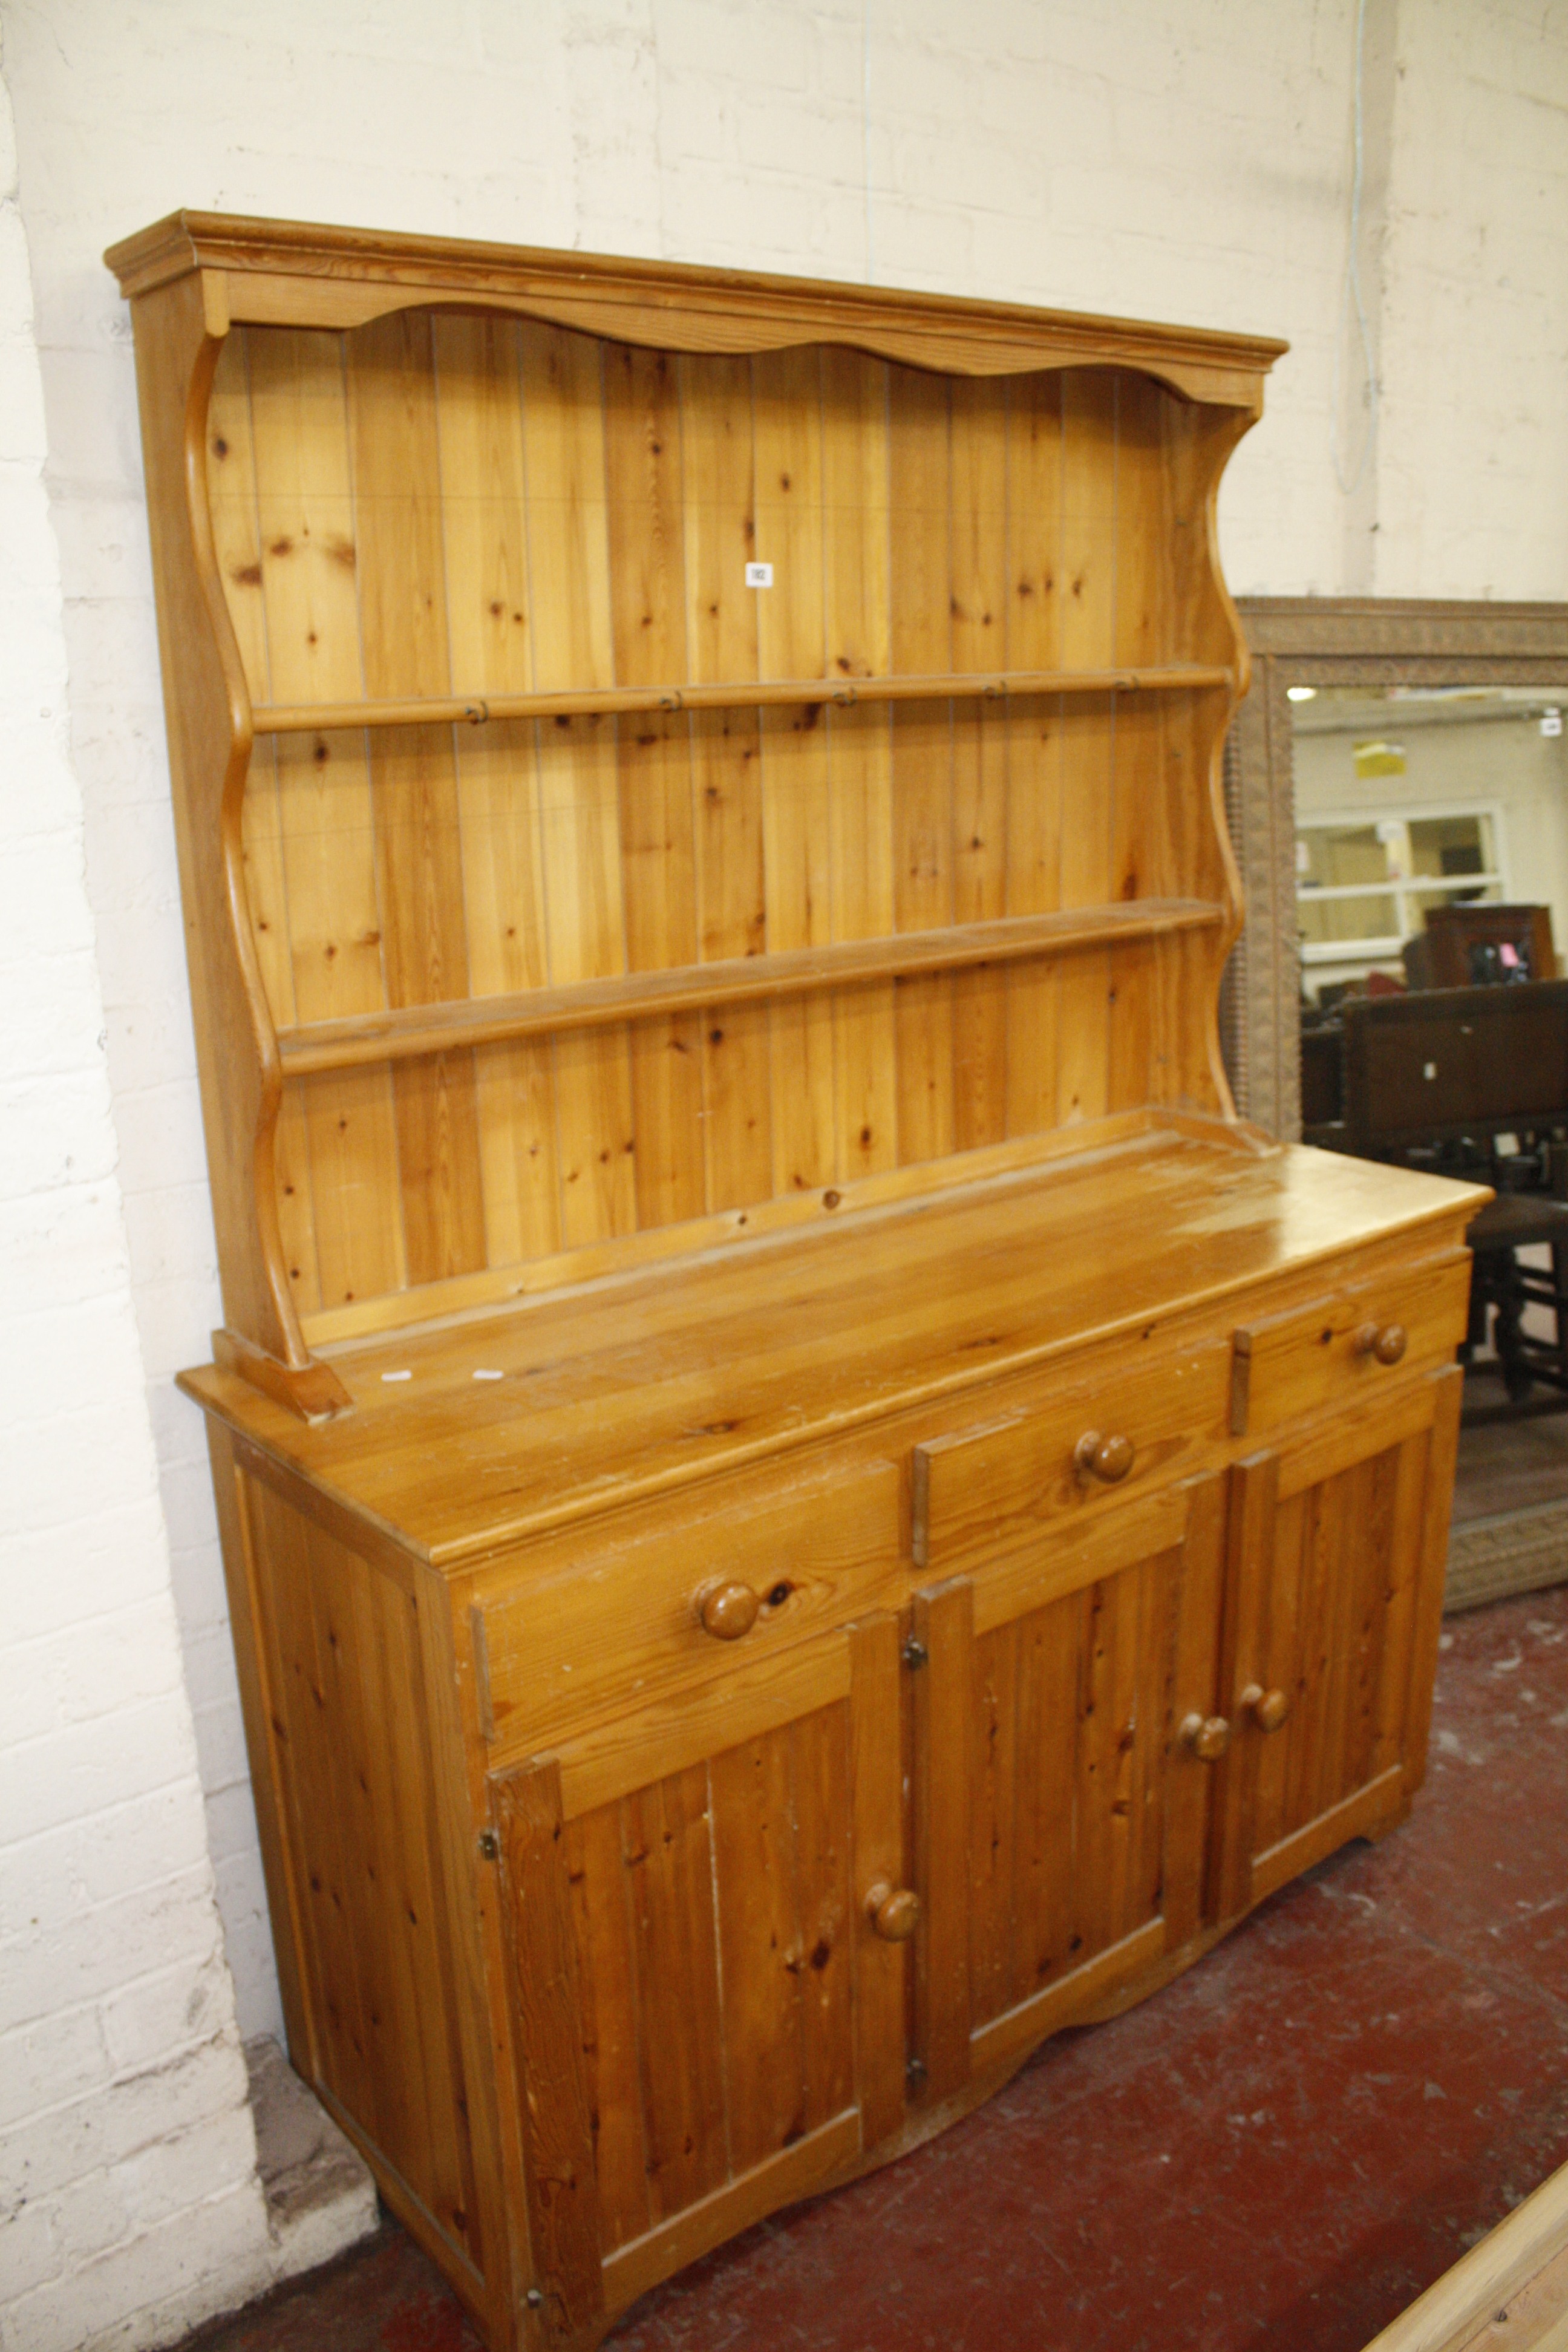 A pine dresser with enclose plate rack, three frieze drawers and cupboards below.180cm high x